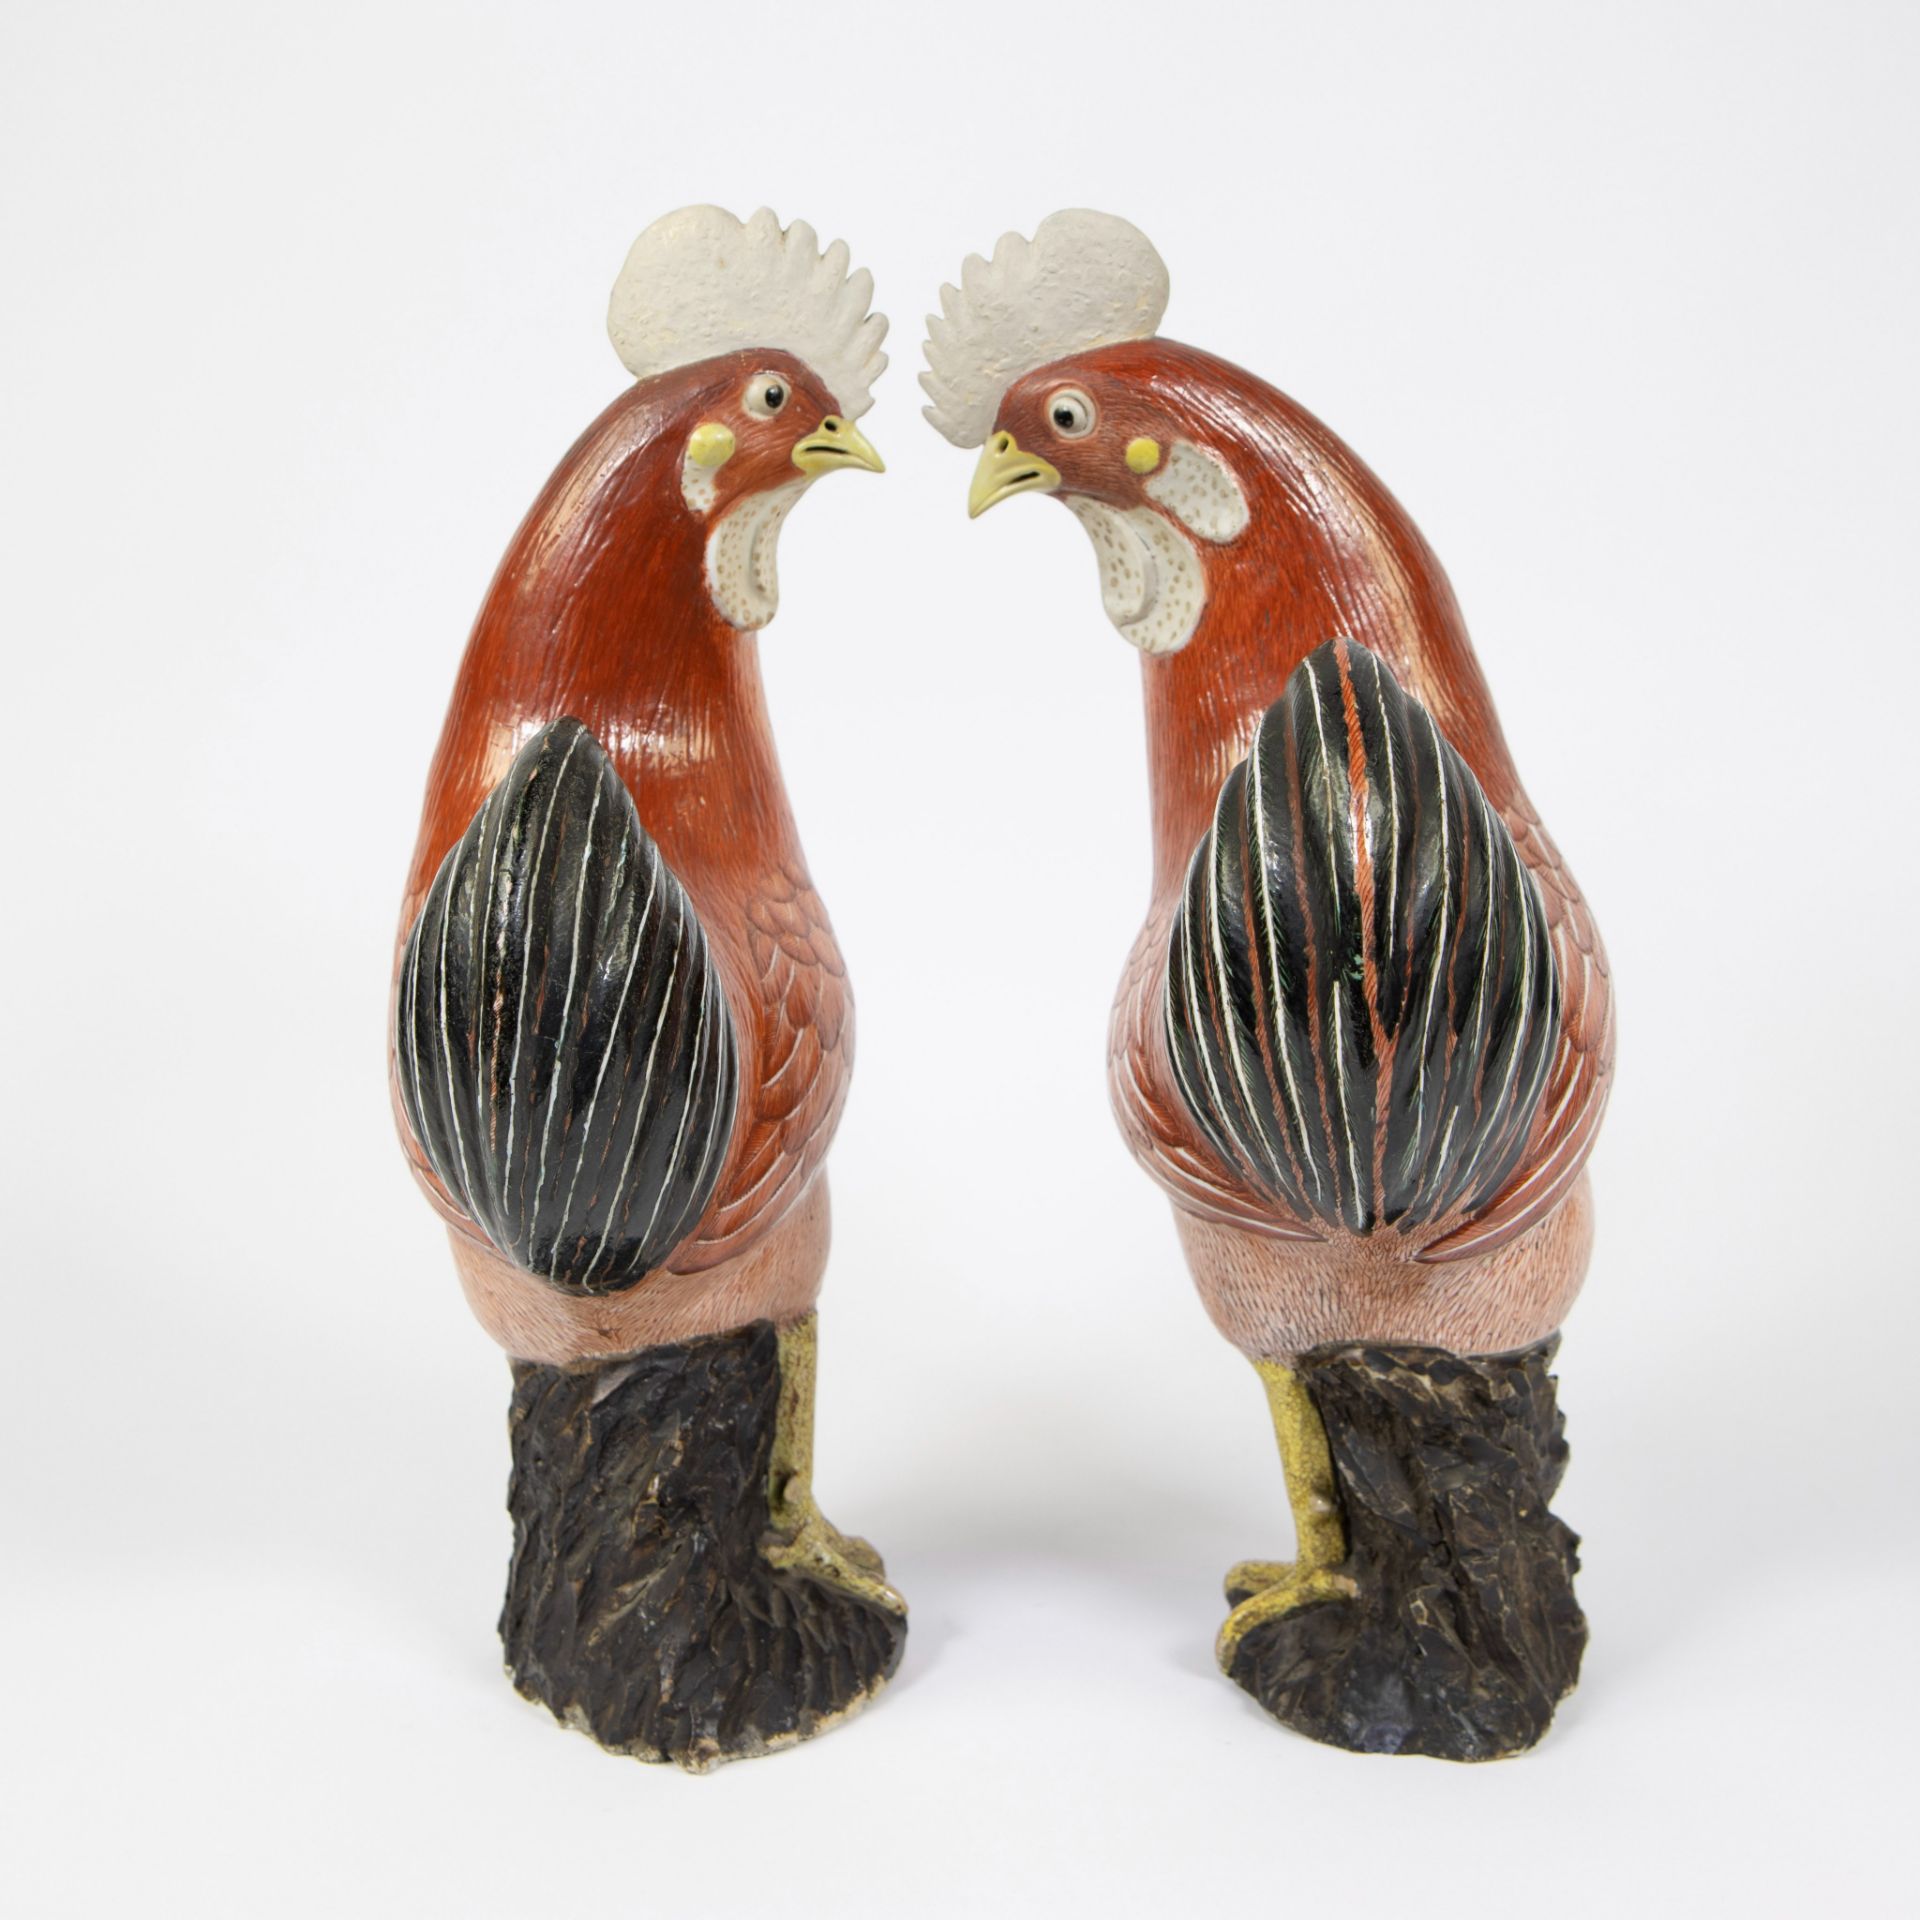 Pair of Chinese ceramic roosters, finely painted in reddish brown, 18th century Kangxi - Image 4 of 5